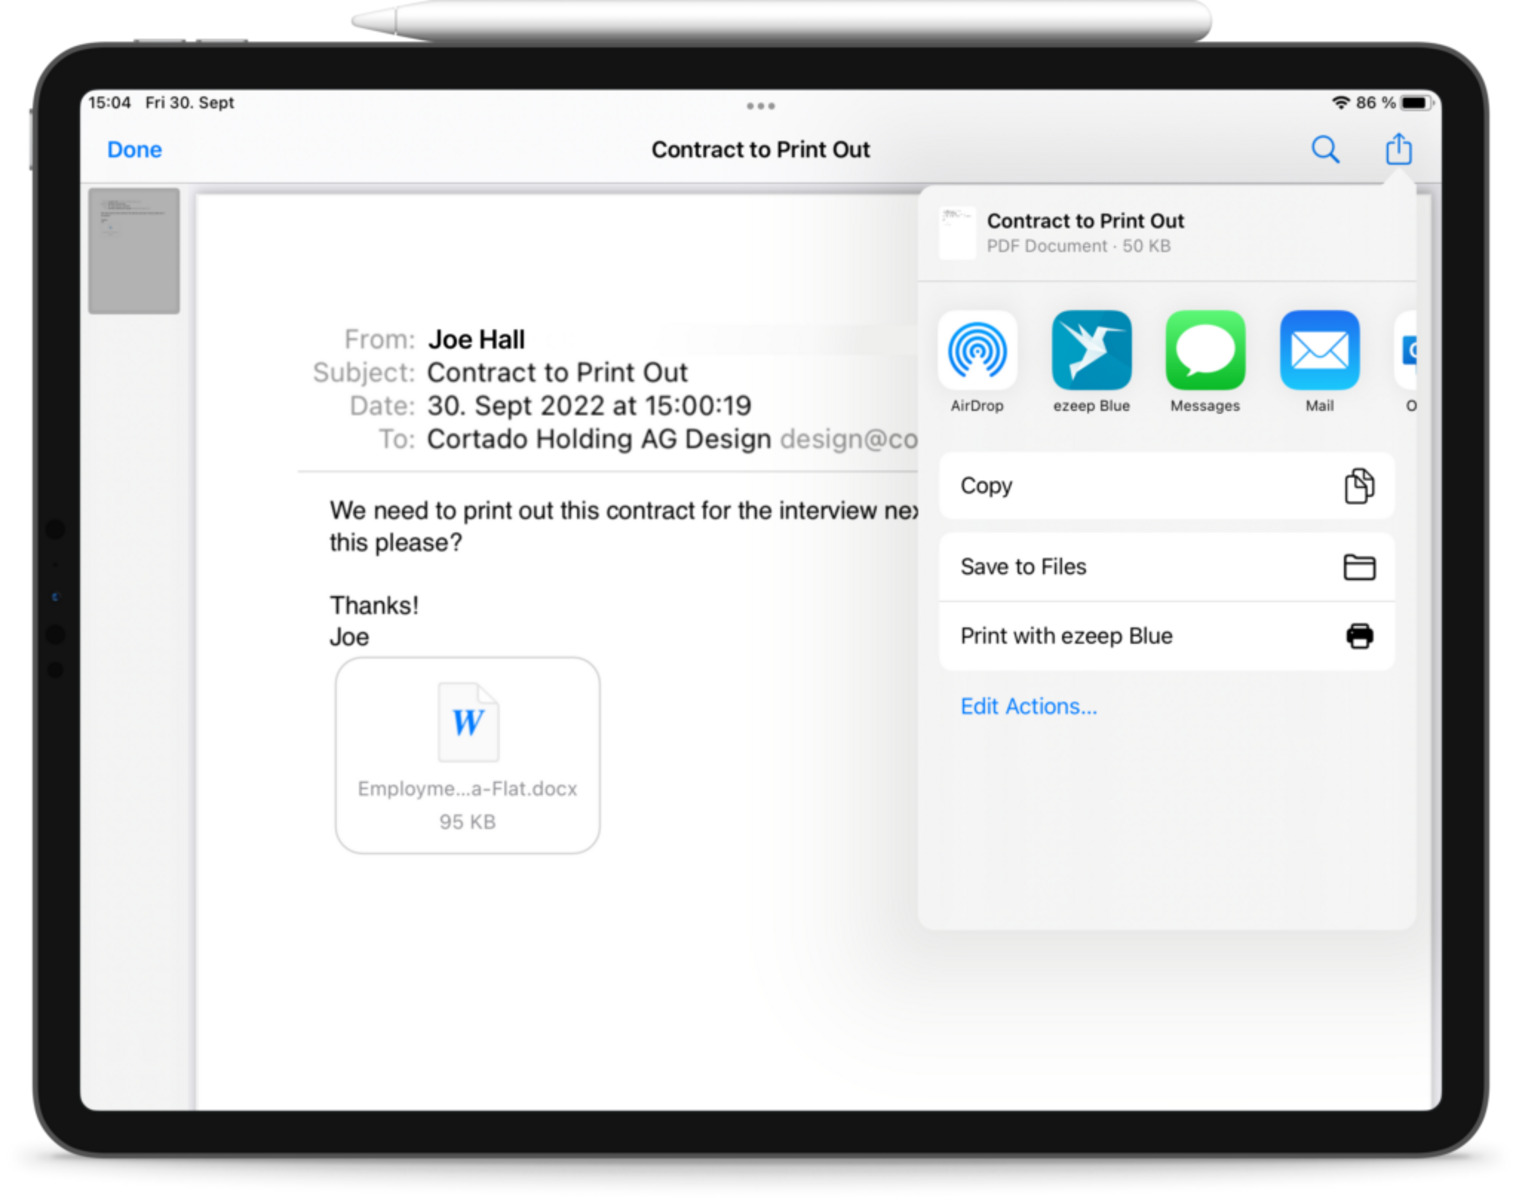 How To Print An Email From ICloud.com